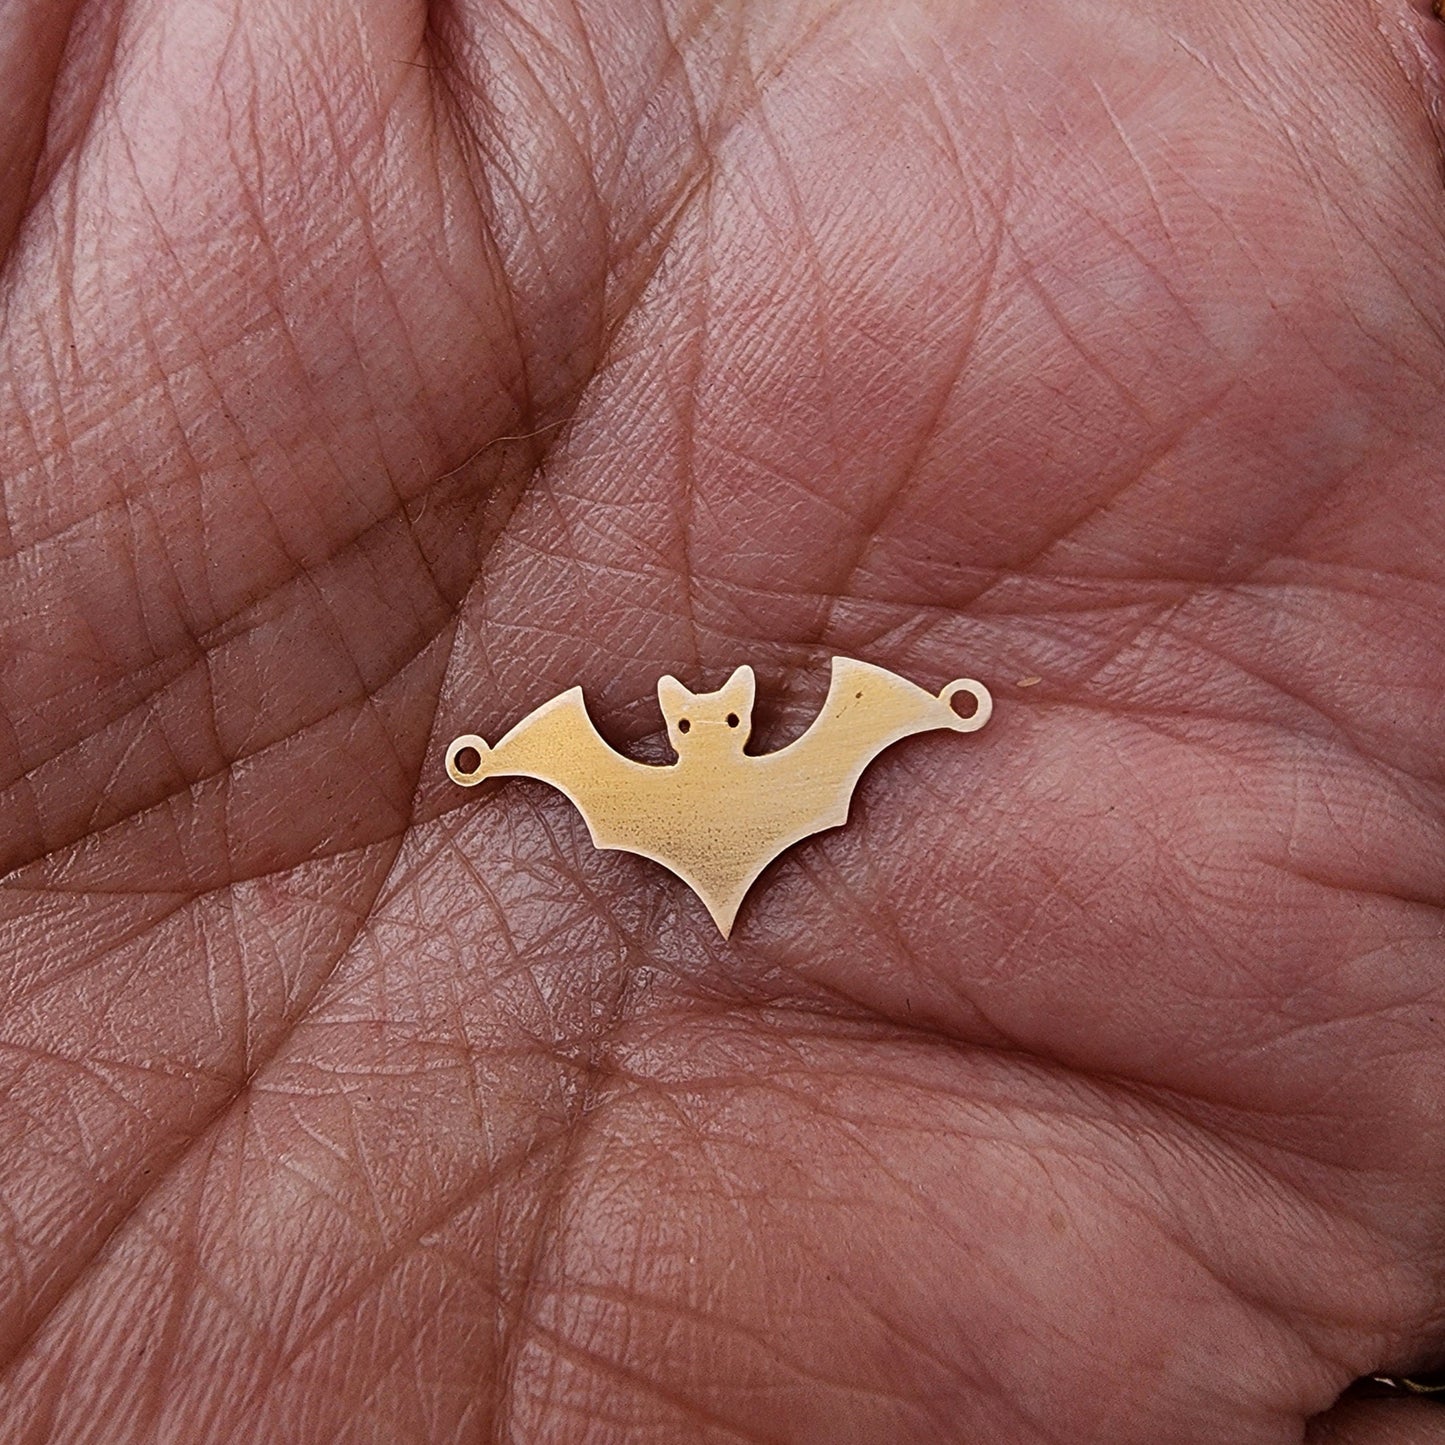 gold filled bat connector - sterling silver or solid gold- permanent jewelry connectors- charm, pendant, 10 mm tal Halloween fall